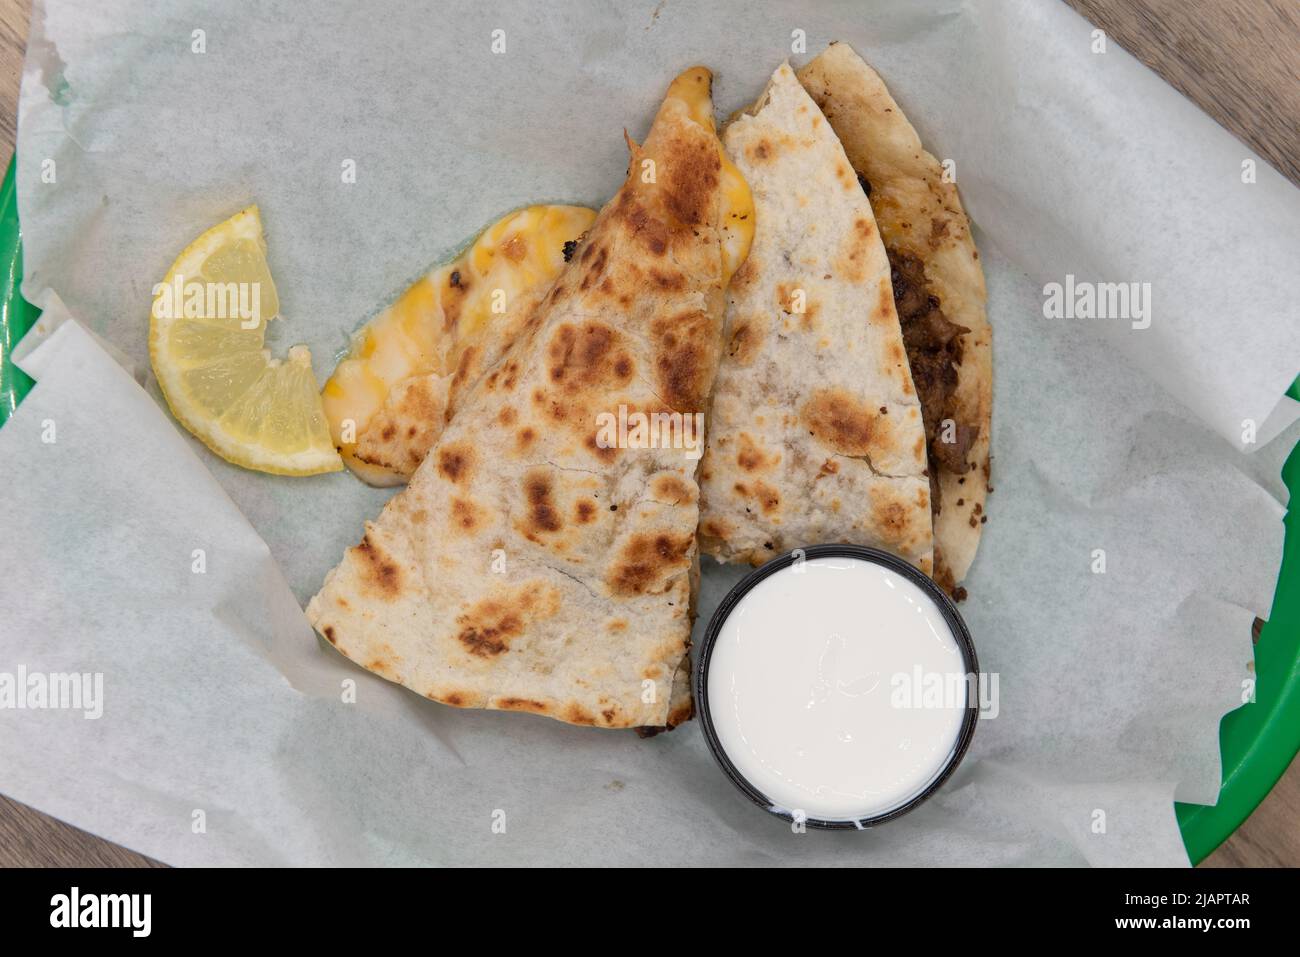 Overhead view of tempting crispy fried asada quesadilla loaded with grilled steak meat and cut into triangle pieces to eat. Stock Photo